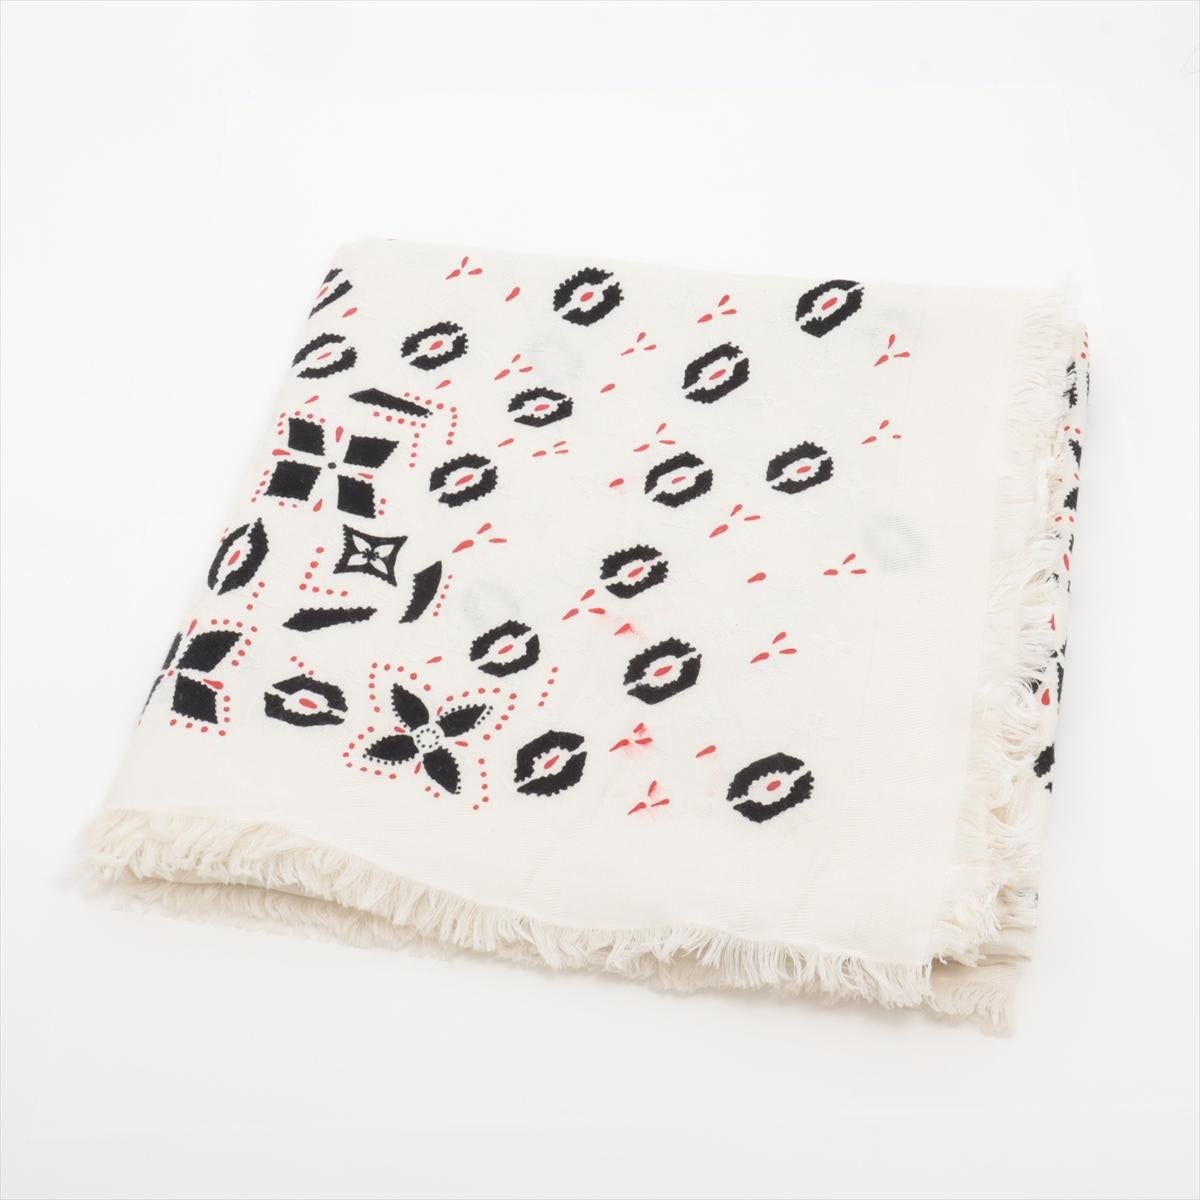 The Louis Vuitton Monogram Graphic Jacquard Scarf in White and Black is a luxurious and versatile accessory that elevates any ensemble. Crafted from a blend of silk and wool, the shawl features a sophisticated jacquard weave showcasing the iconic